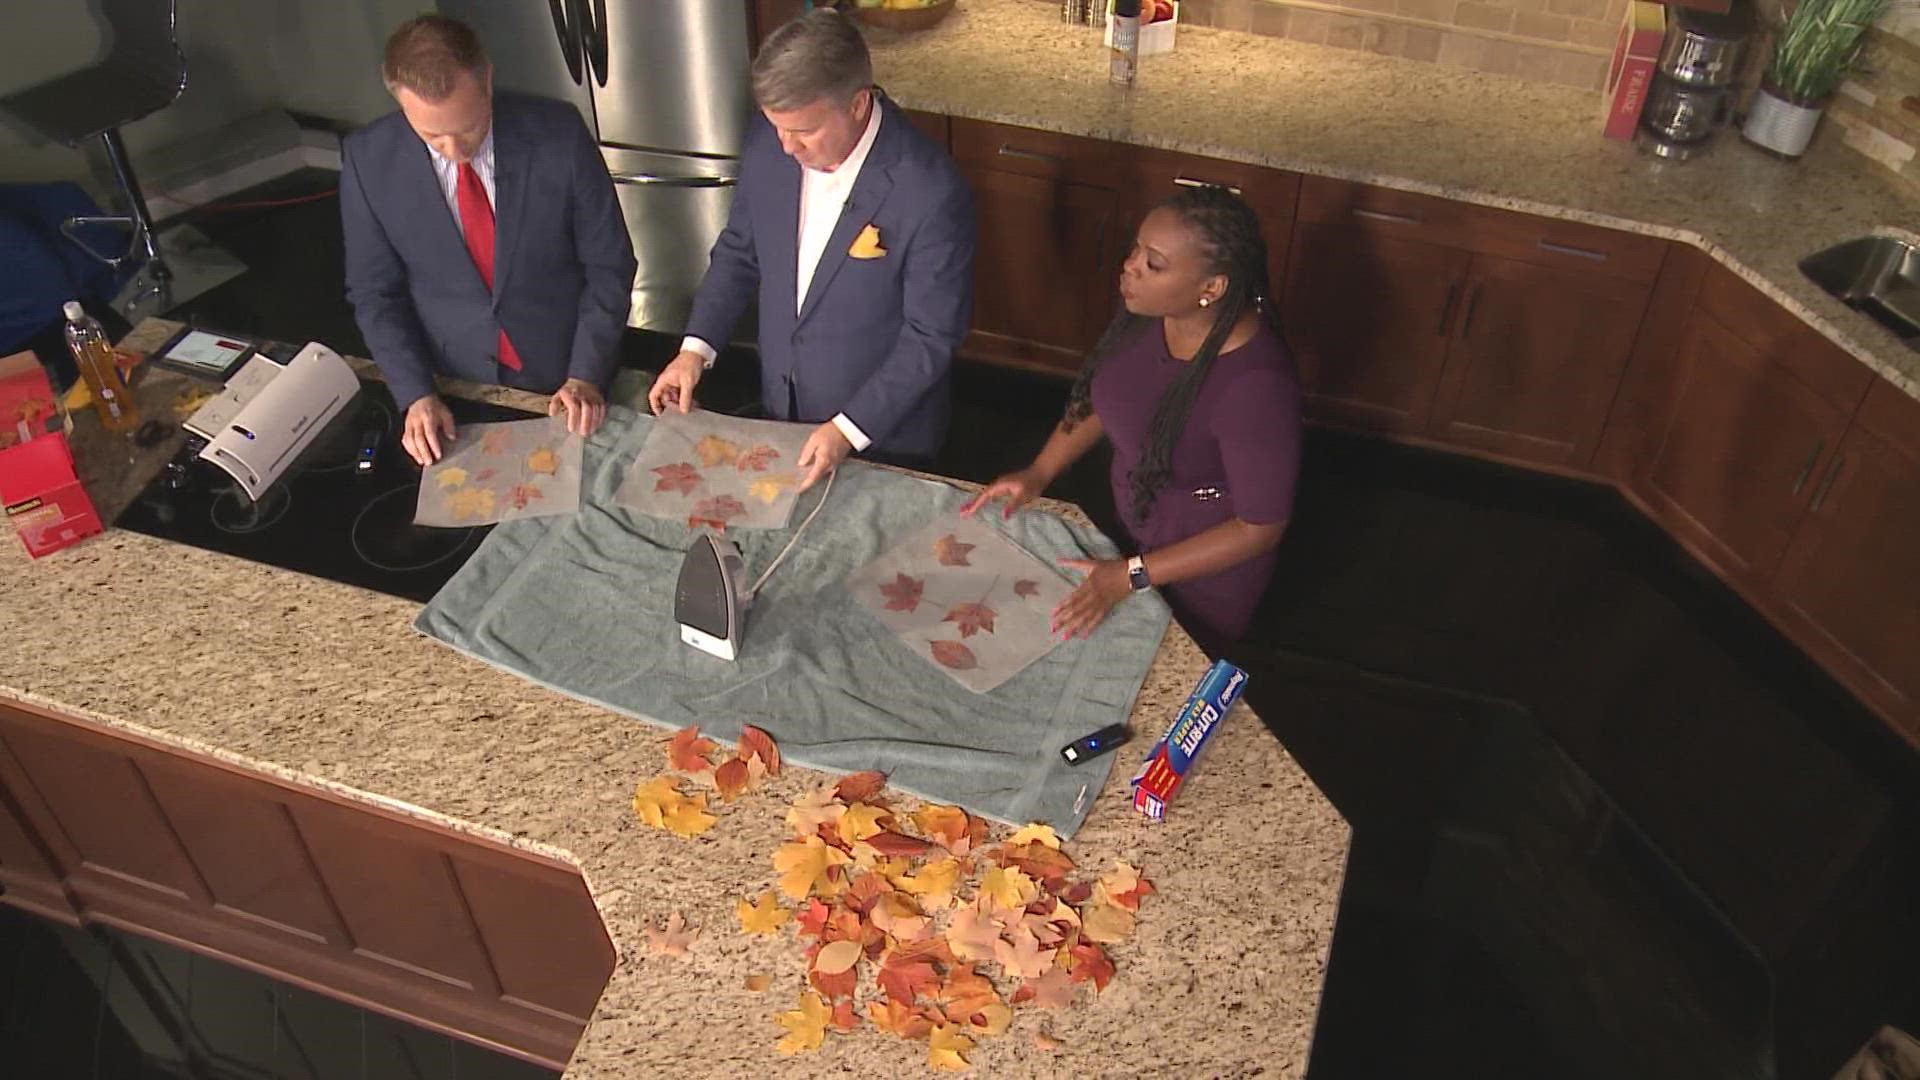 Ironing fall leaves into wax paper can keep those vibrant colors longer.